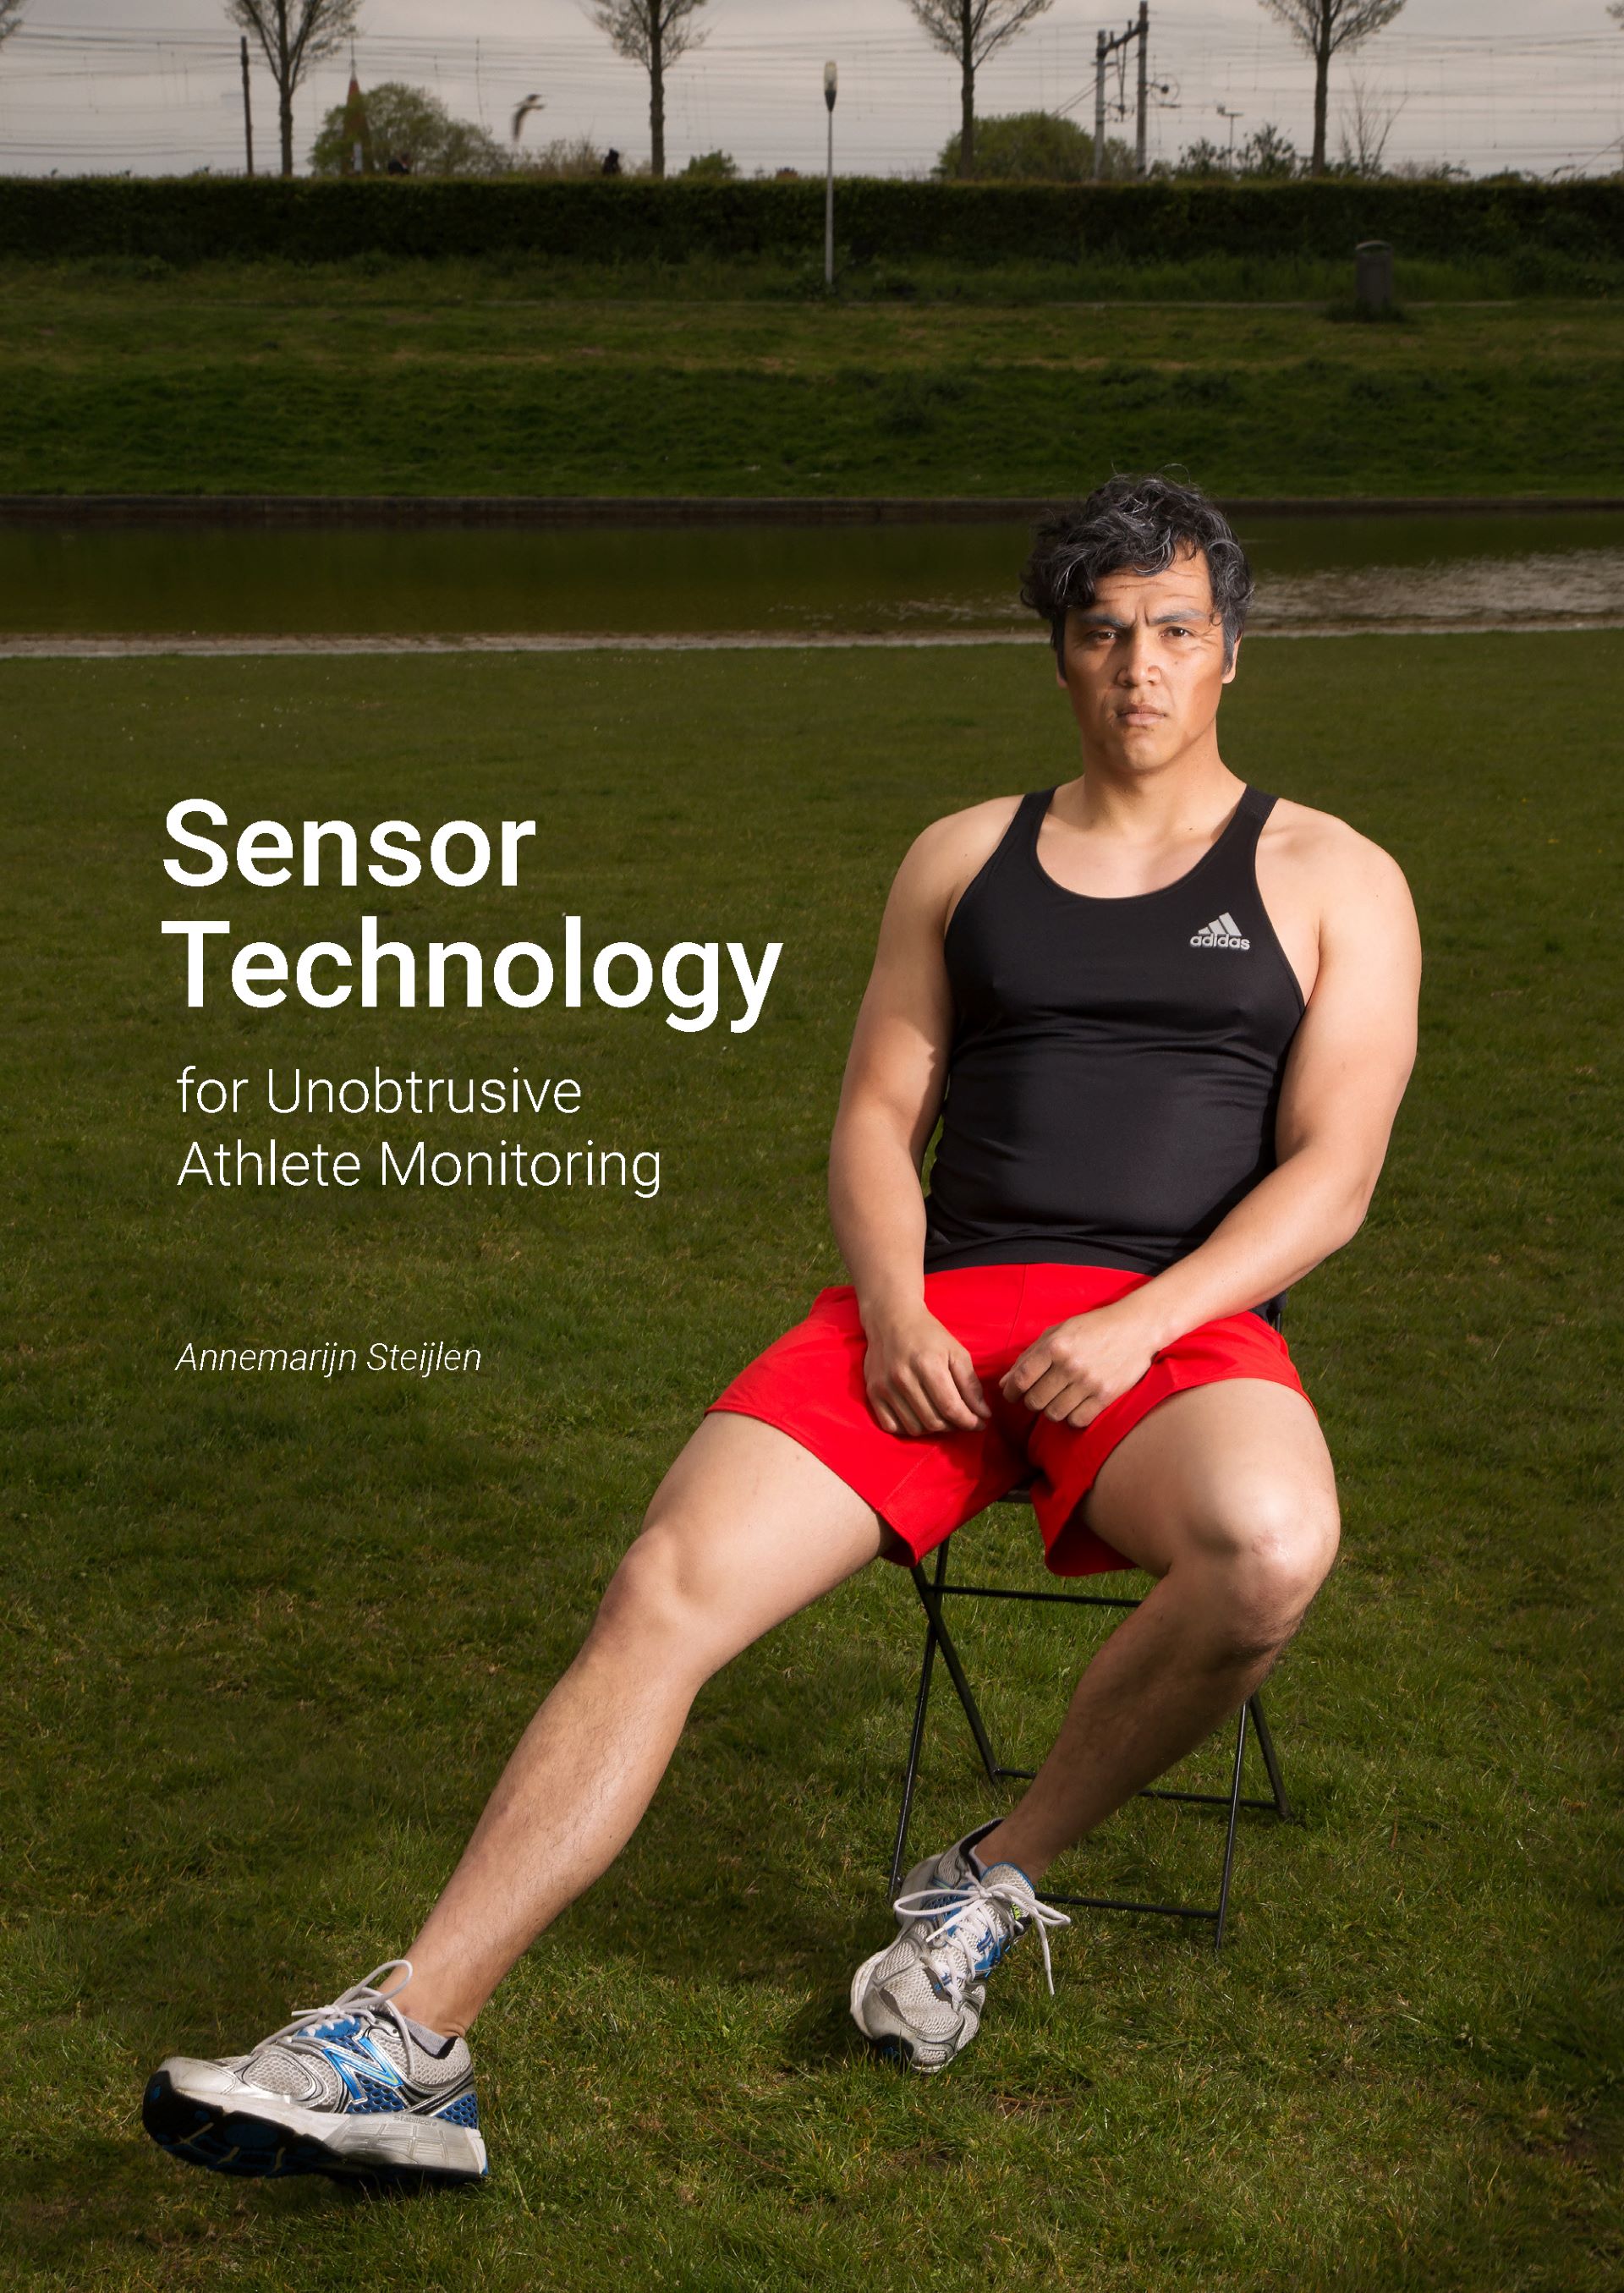 Cover of Annemarijn's thesis, with a photo of a male athlete sitting on a chair.